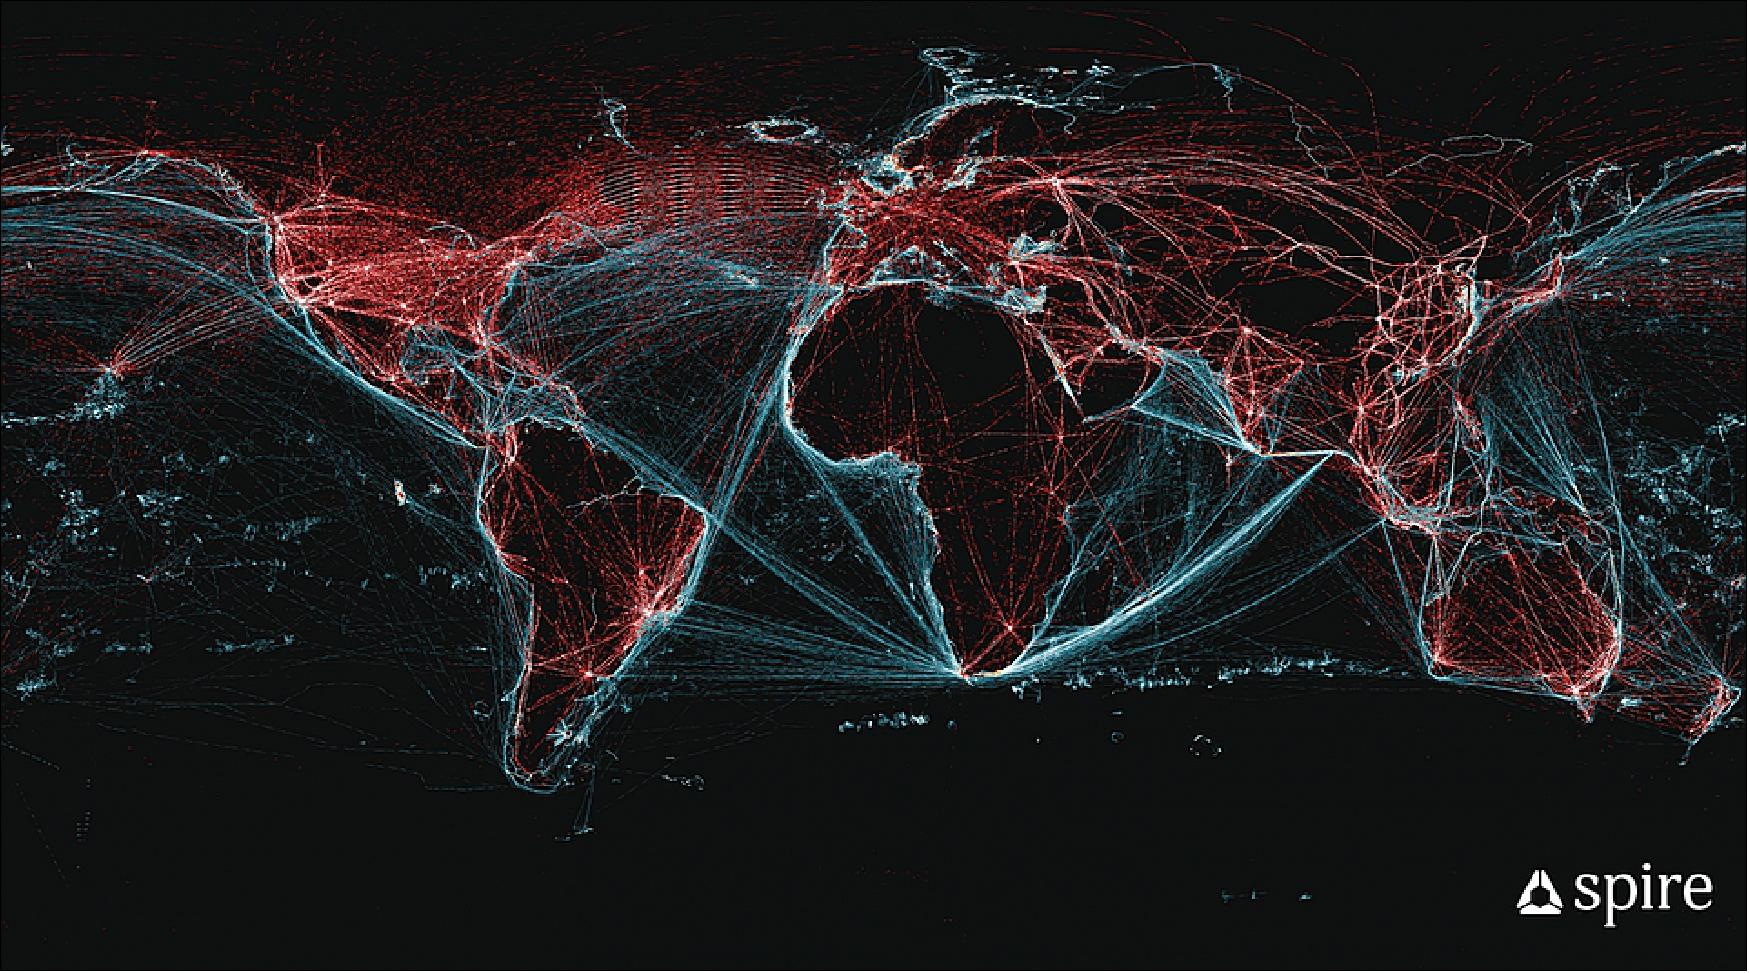 Figure 17: A worldwide representation of the signals that Spire Global satellites are tracking (image credit: Spire Global)